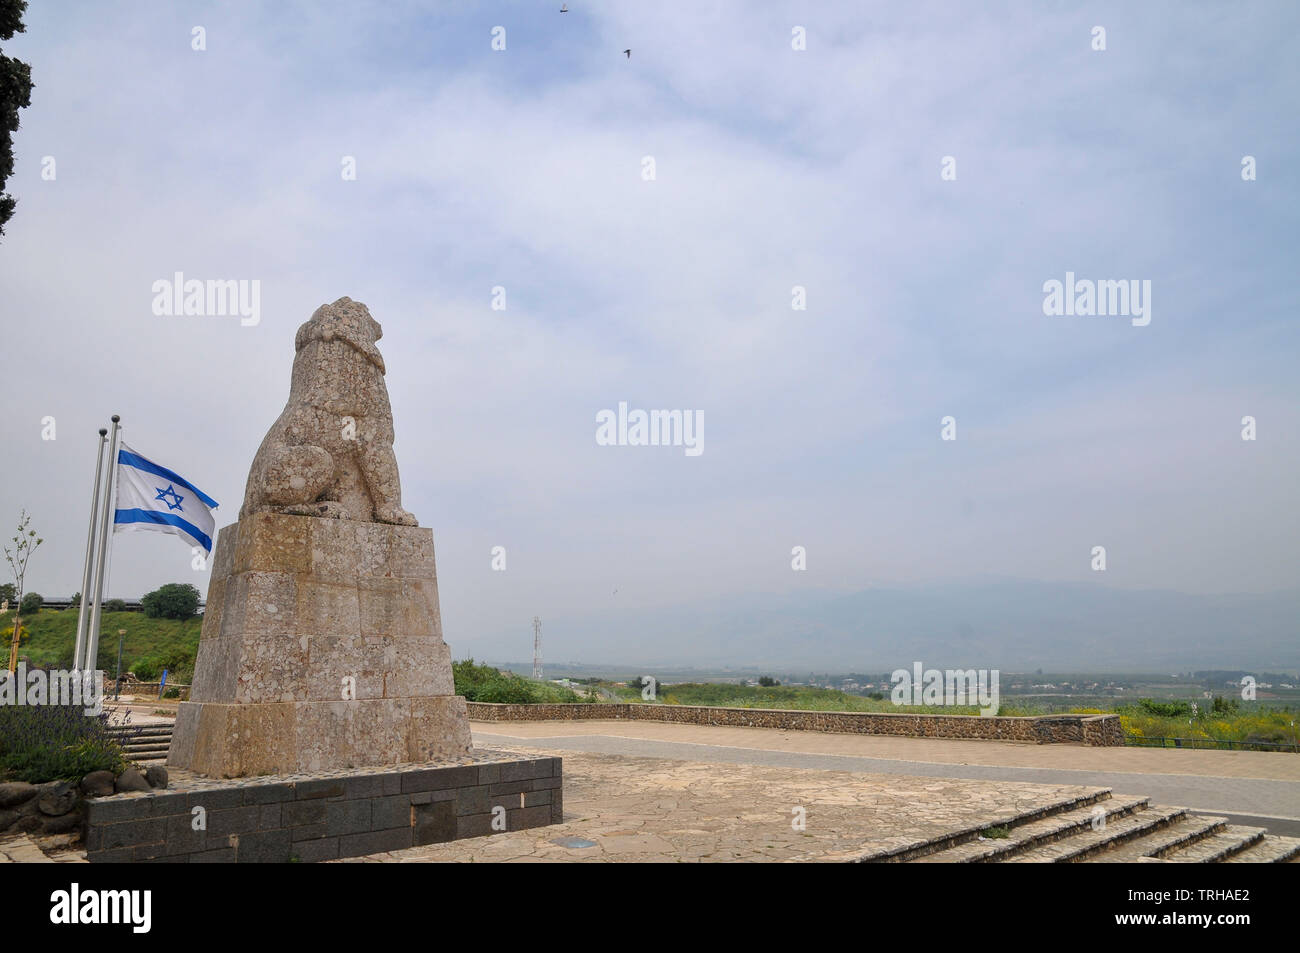 Israel, Upper Galilee, Tel Hai The roaring lion monument in honour of Yosef Trumpeldor and friends who died while protecting the settlement from Arab Stock Photo